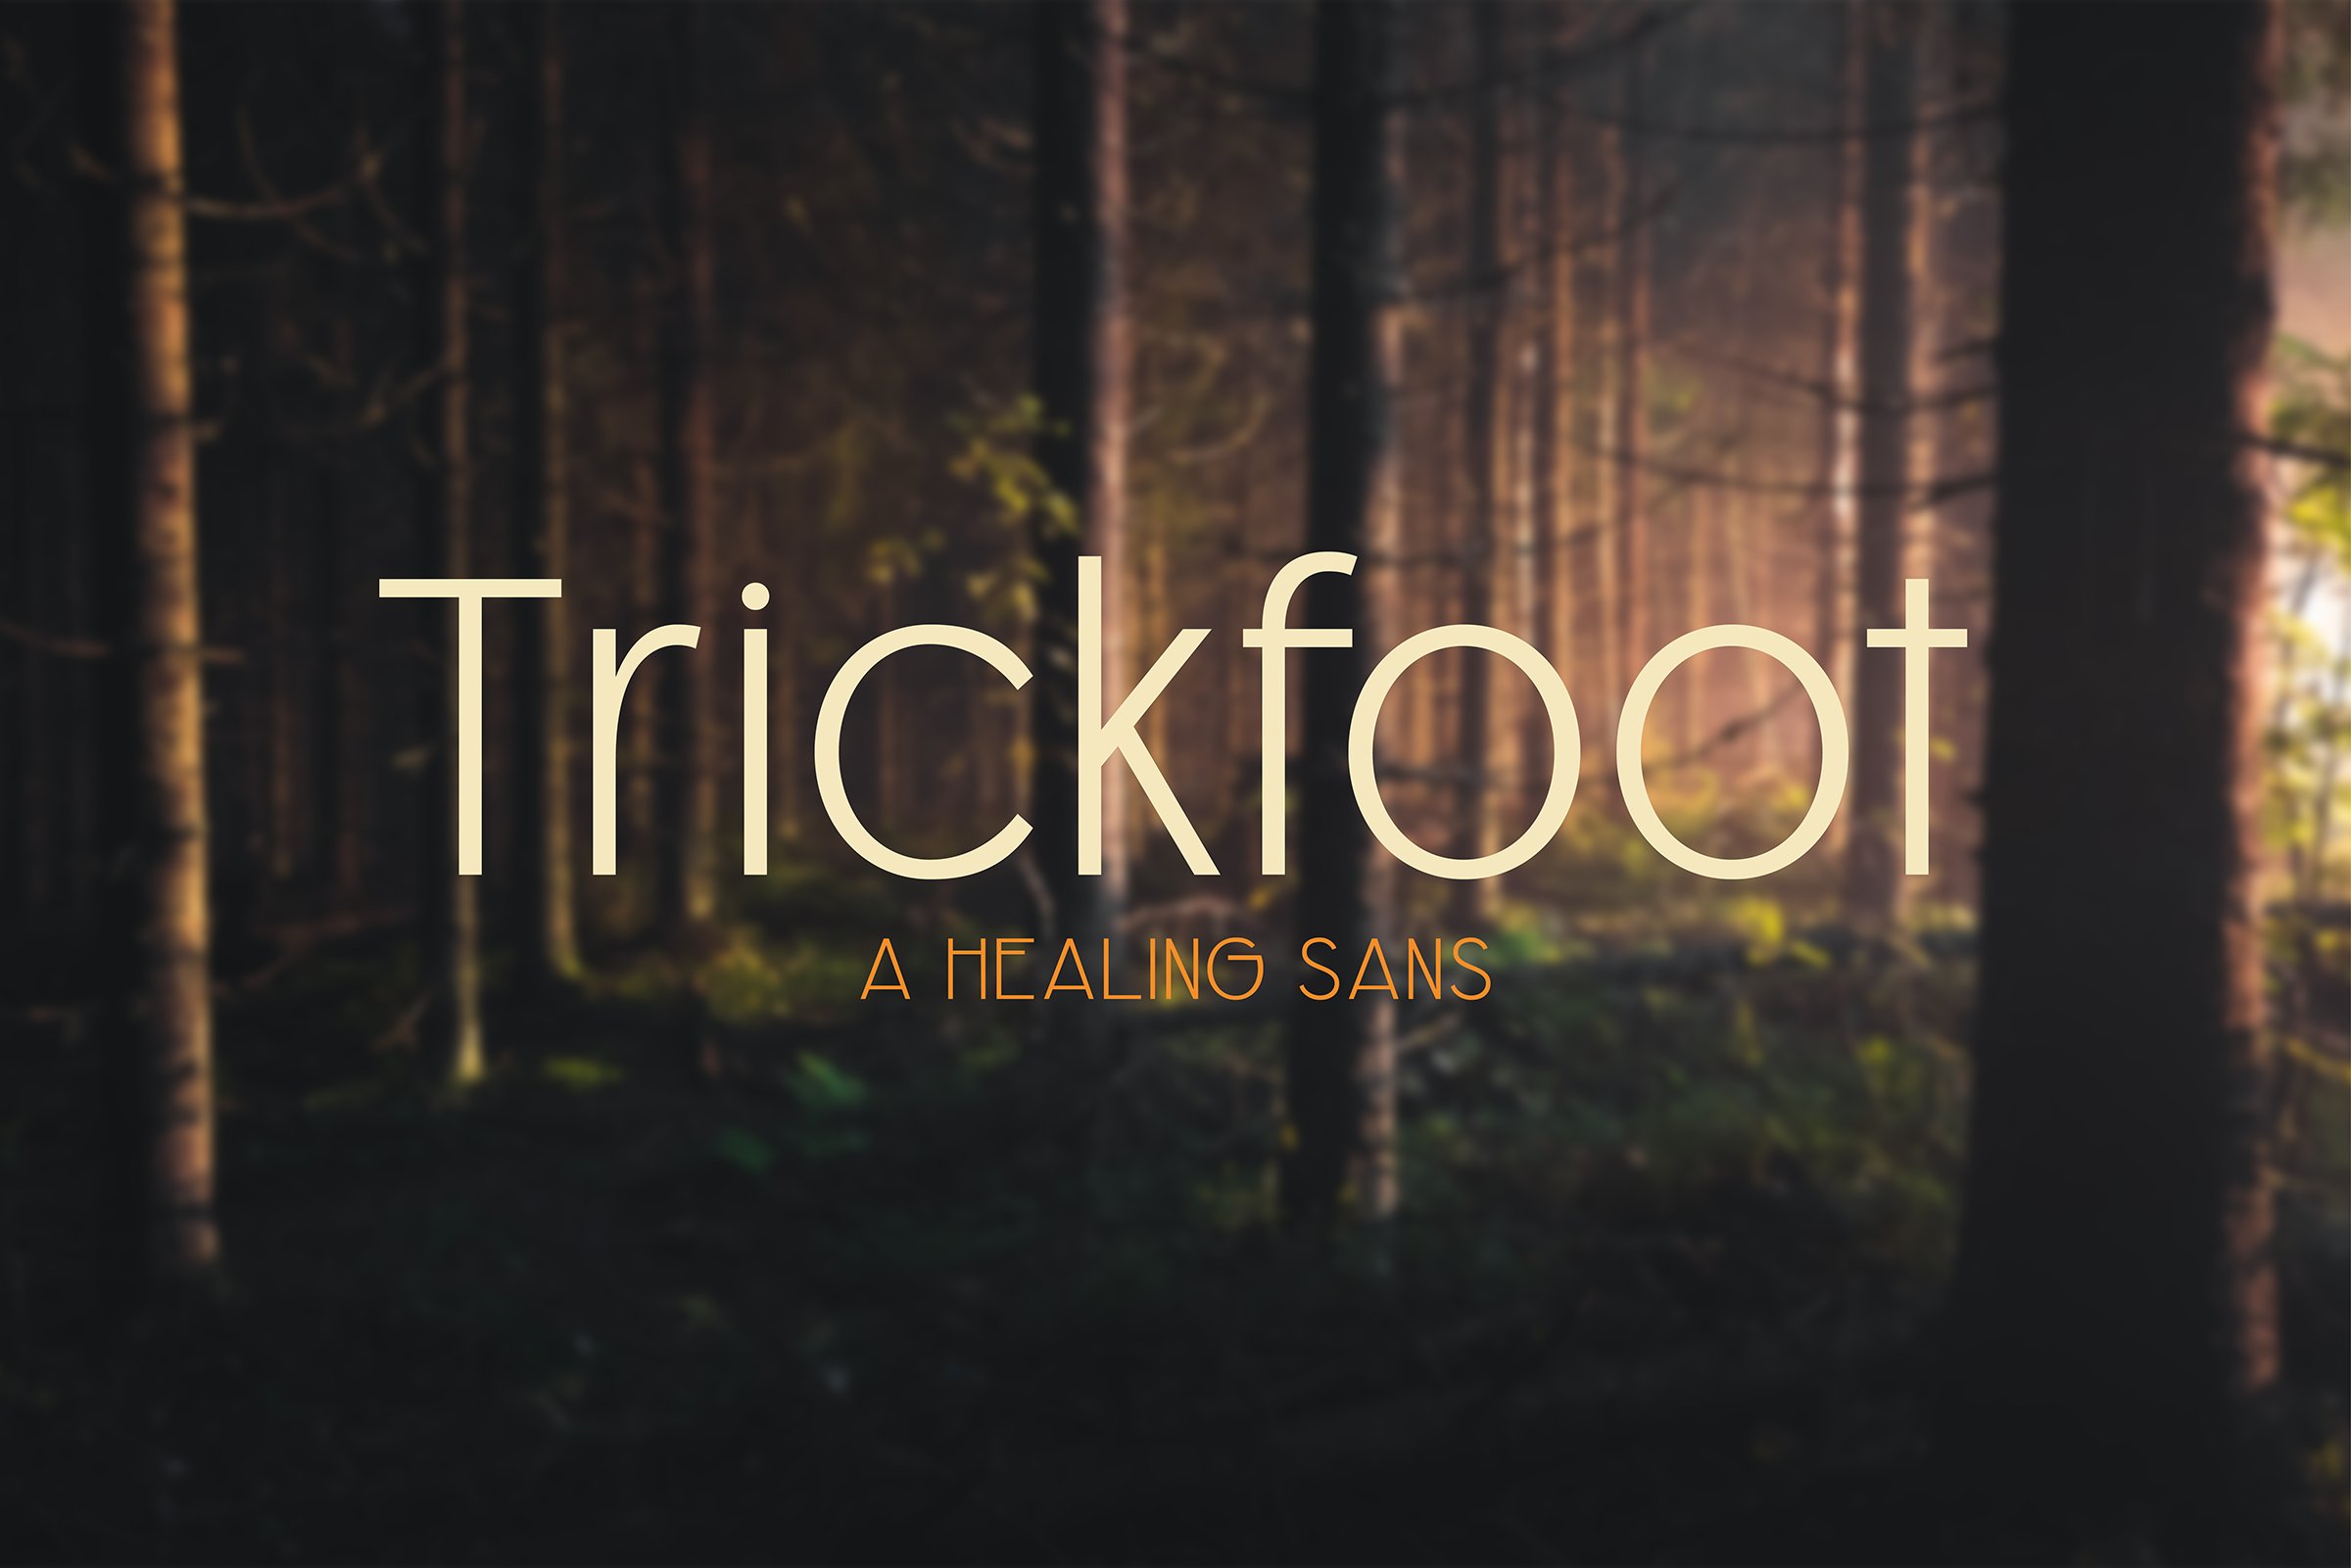 Trickfoot Light cover image.